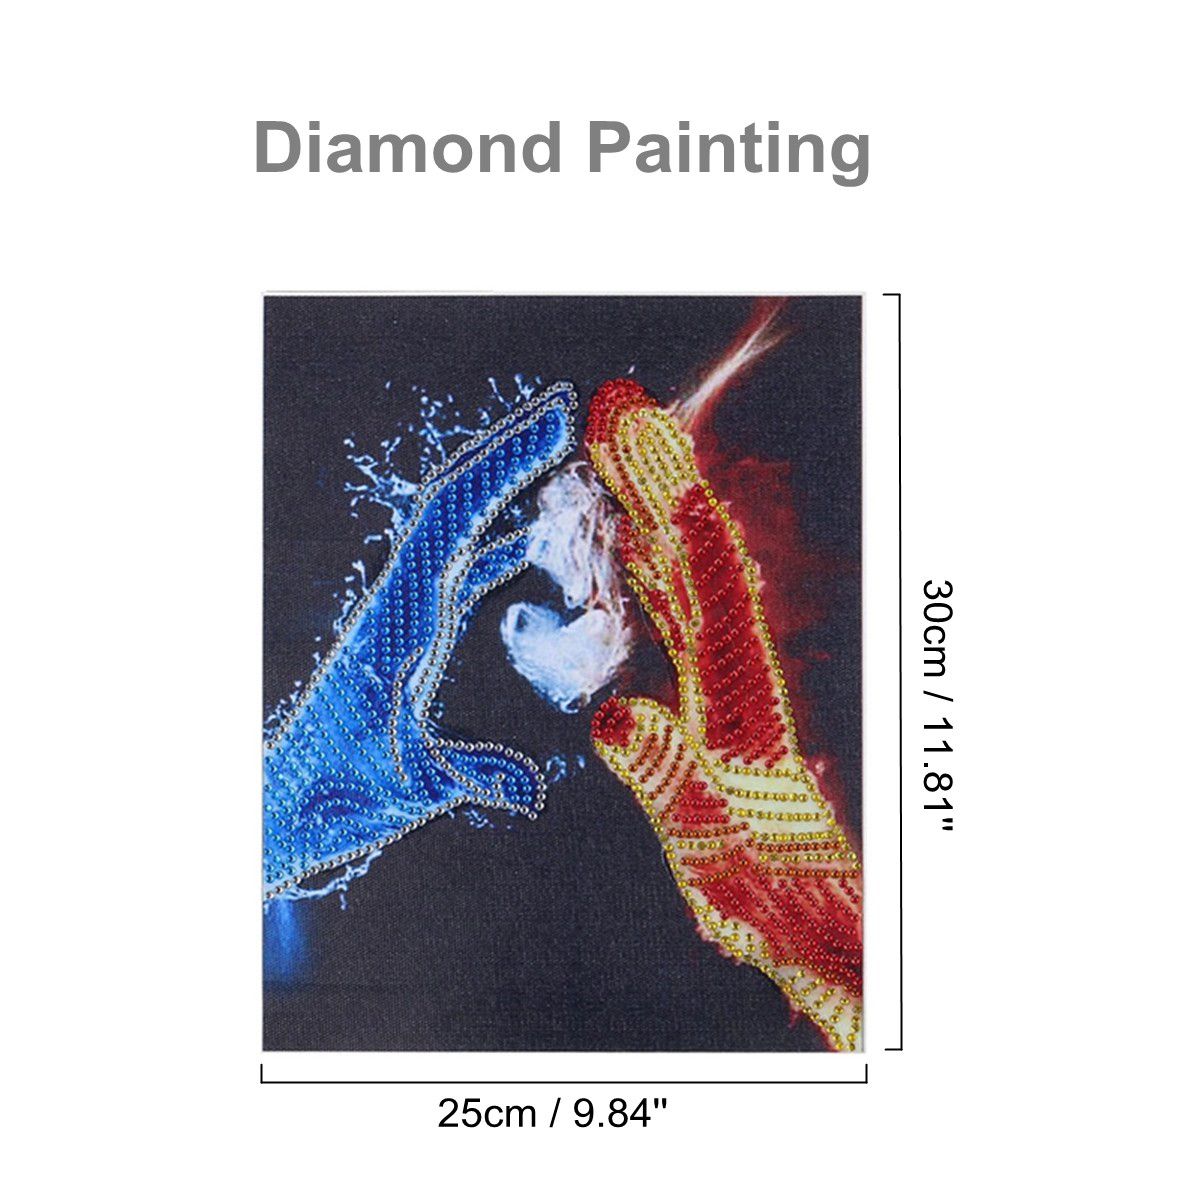 Diamond-Paintings-Hands-Tool-with-30x-25cm-Spot-Drilling-to-Draw-Special-Shaped-Drilling-1466217